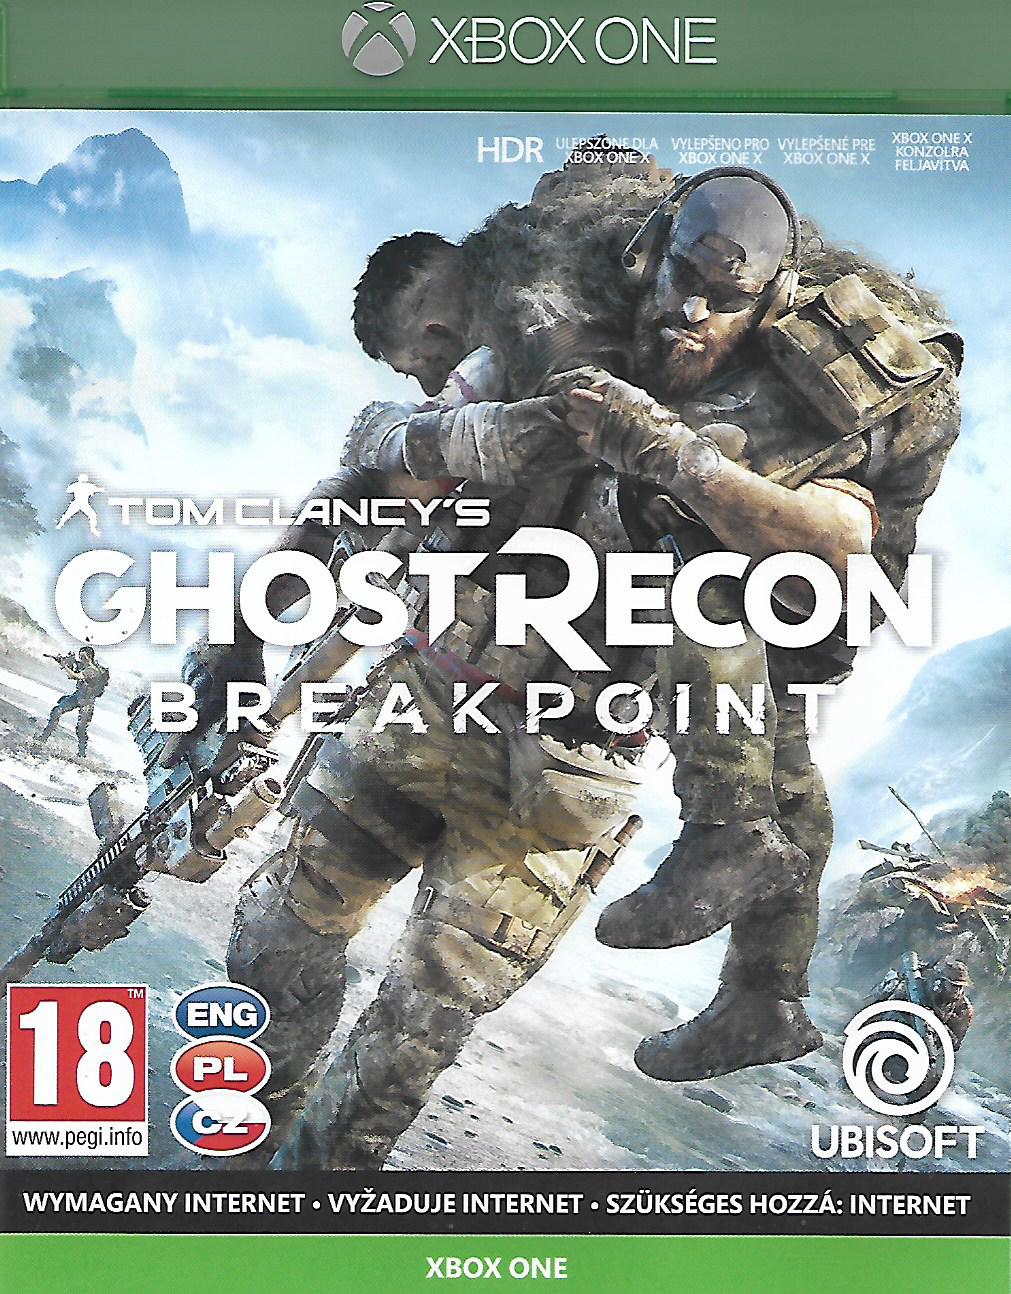 TOM CLANCY'S GHOST RECON BREAKPOINT (XBOX ONE - bazar)